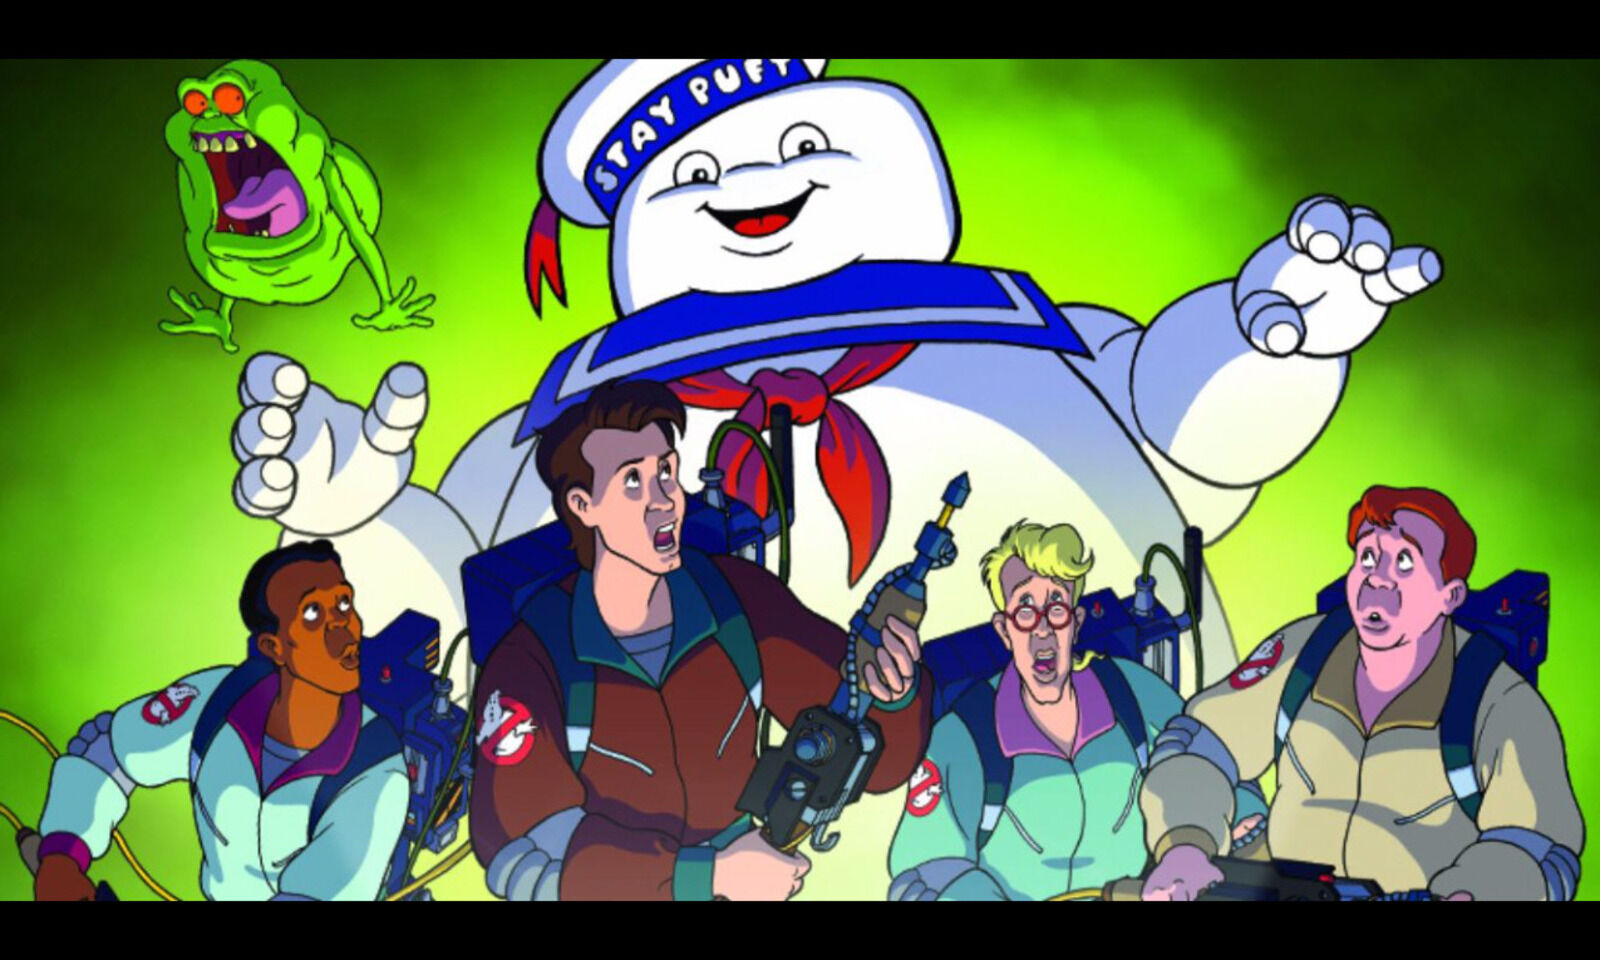 Animated 'Ghostbusters' movie in the works